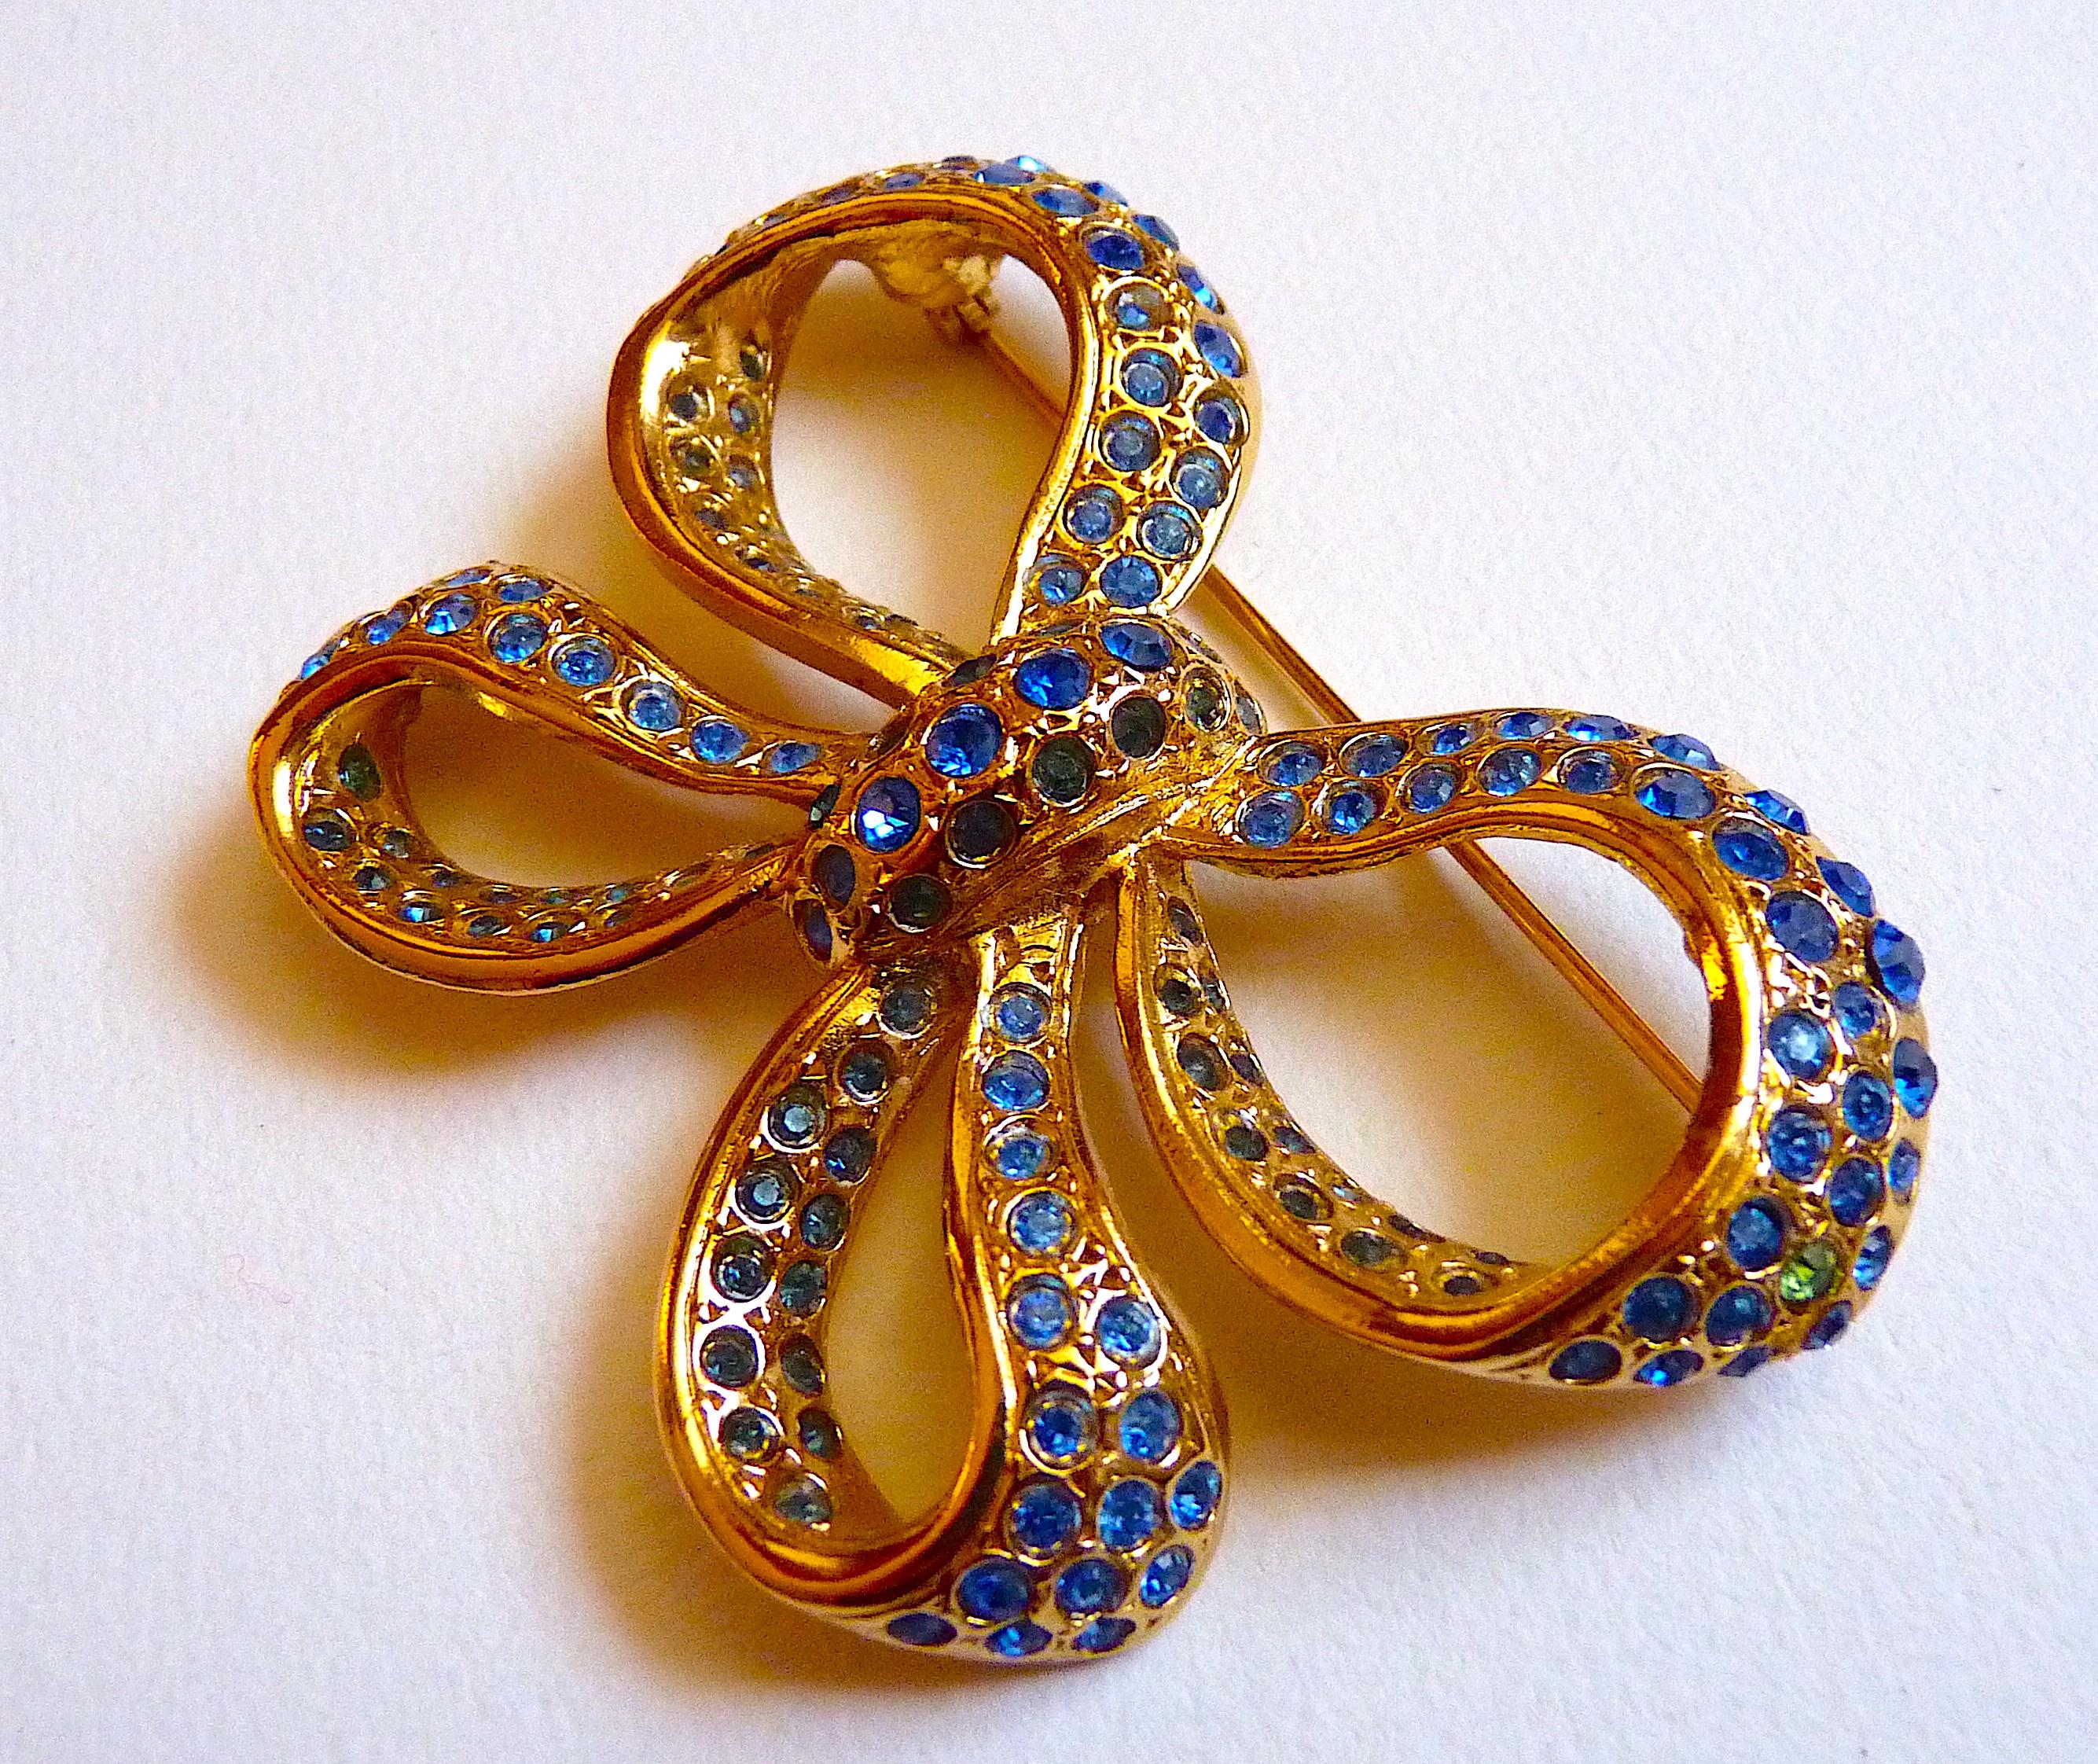 this is a rare iconic vintage YSL Yves Saint Laurent Bow Brooch, gold Tone Metal adorned with Blue Crystal Stones.

Vintage from the 1980s

Signed YSL Made in France at Back

Condition : Very nice vintage condition, one blue stone is slightly